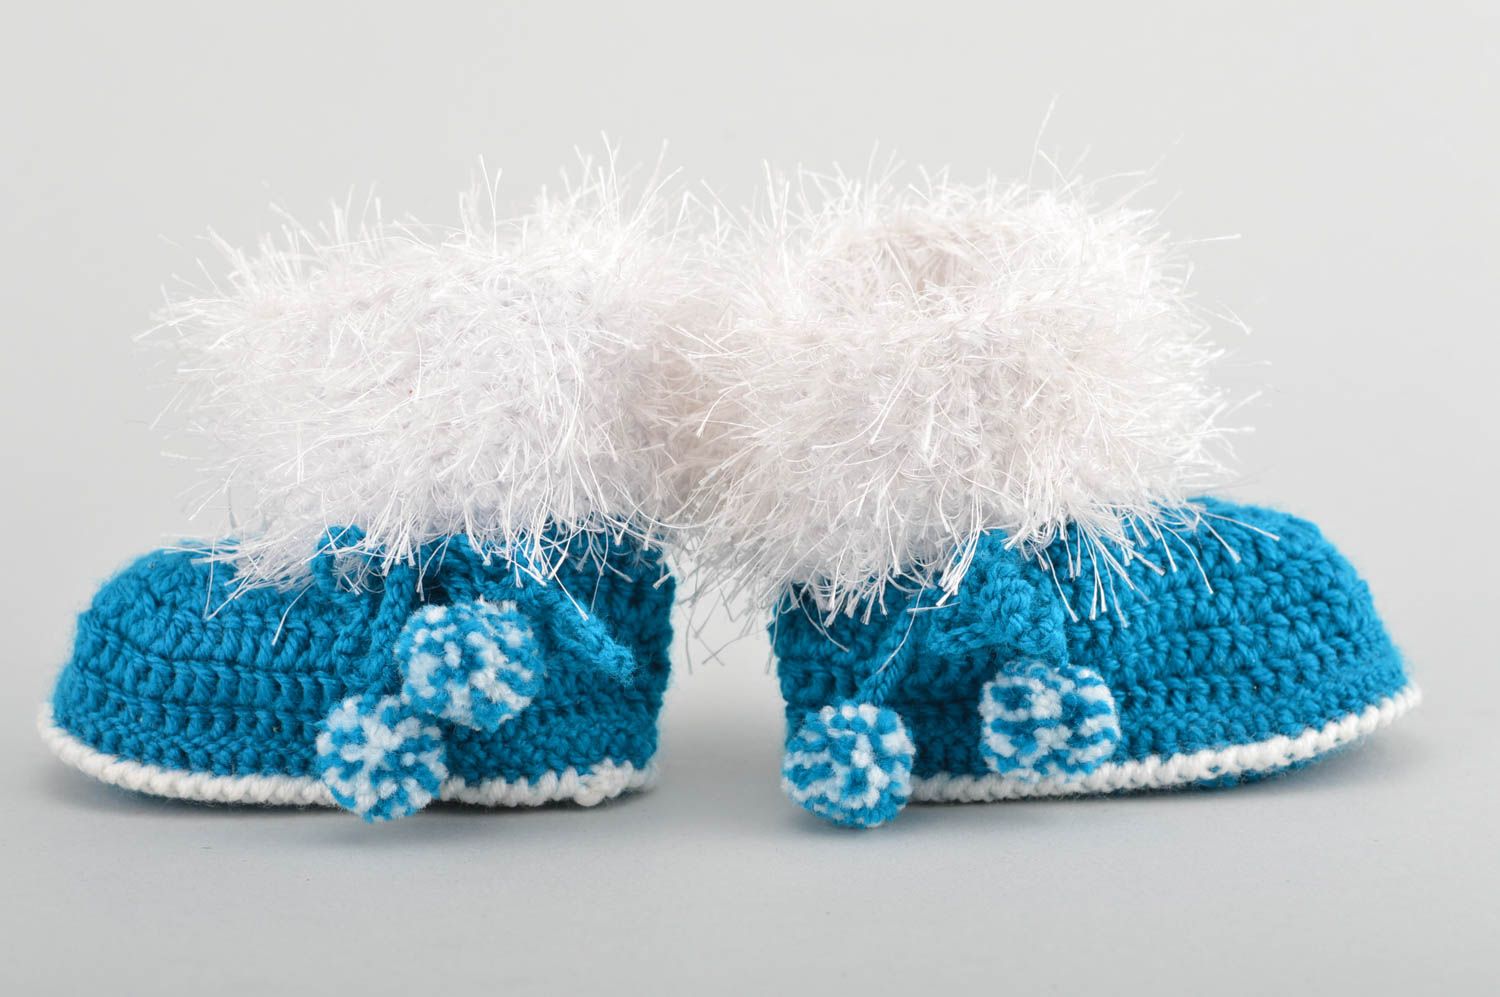 Handmade beautiful blue crocheted baby bootees made of cotton for boys photo 4